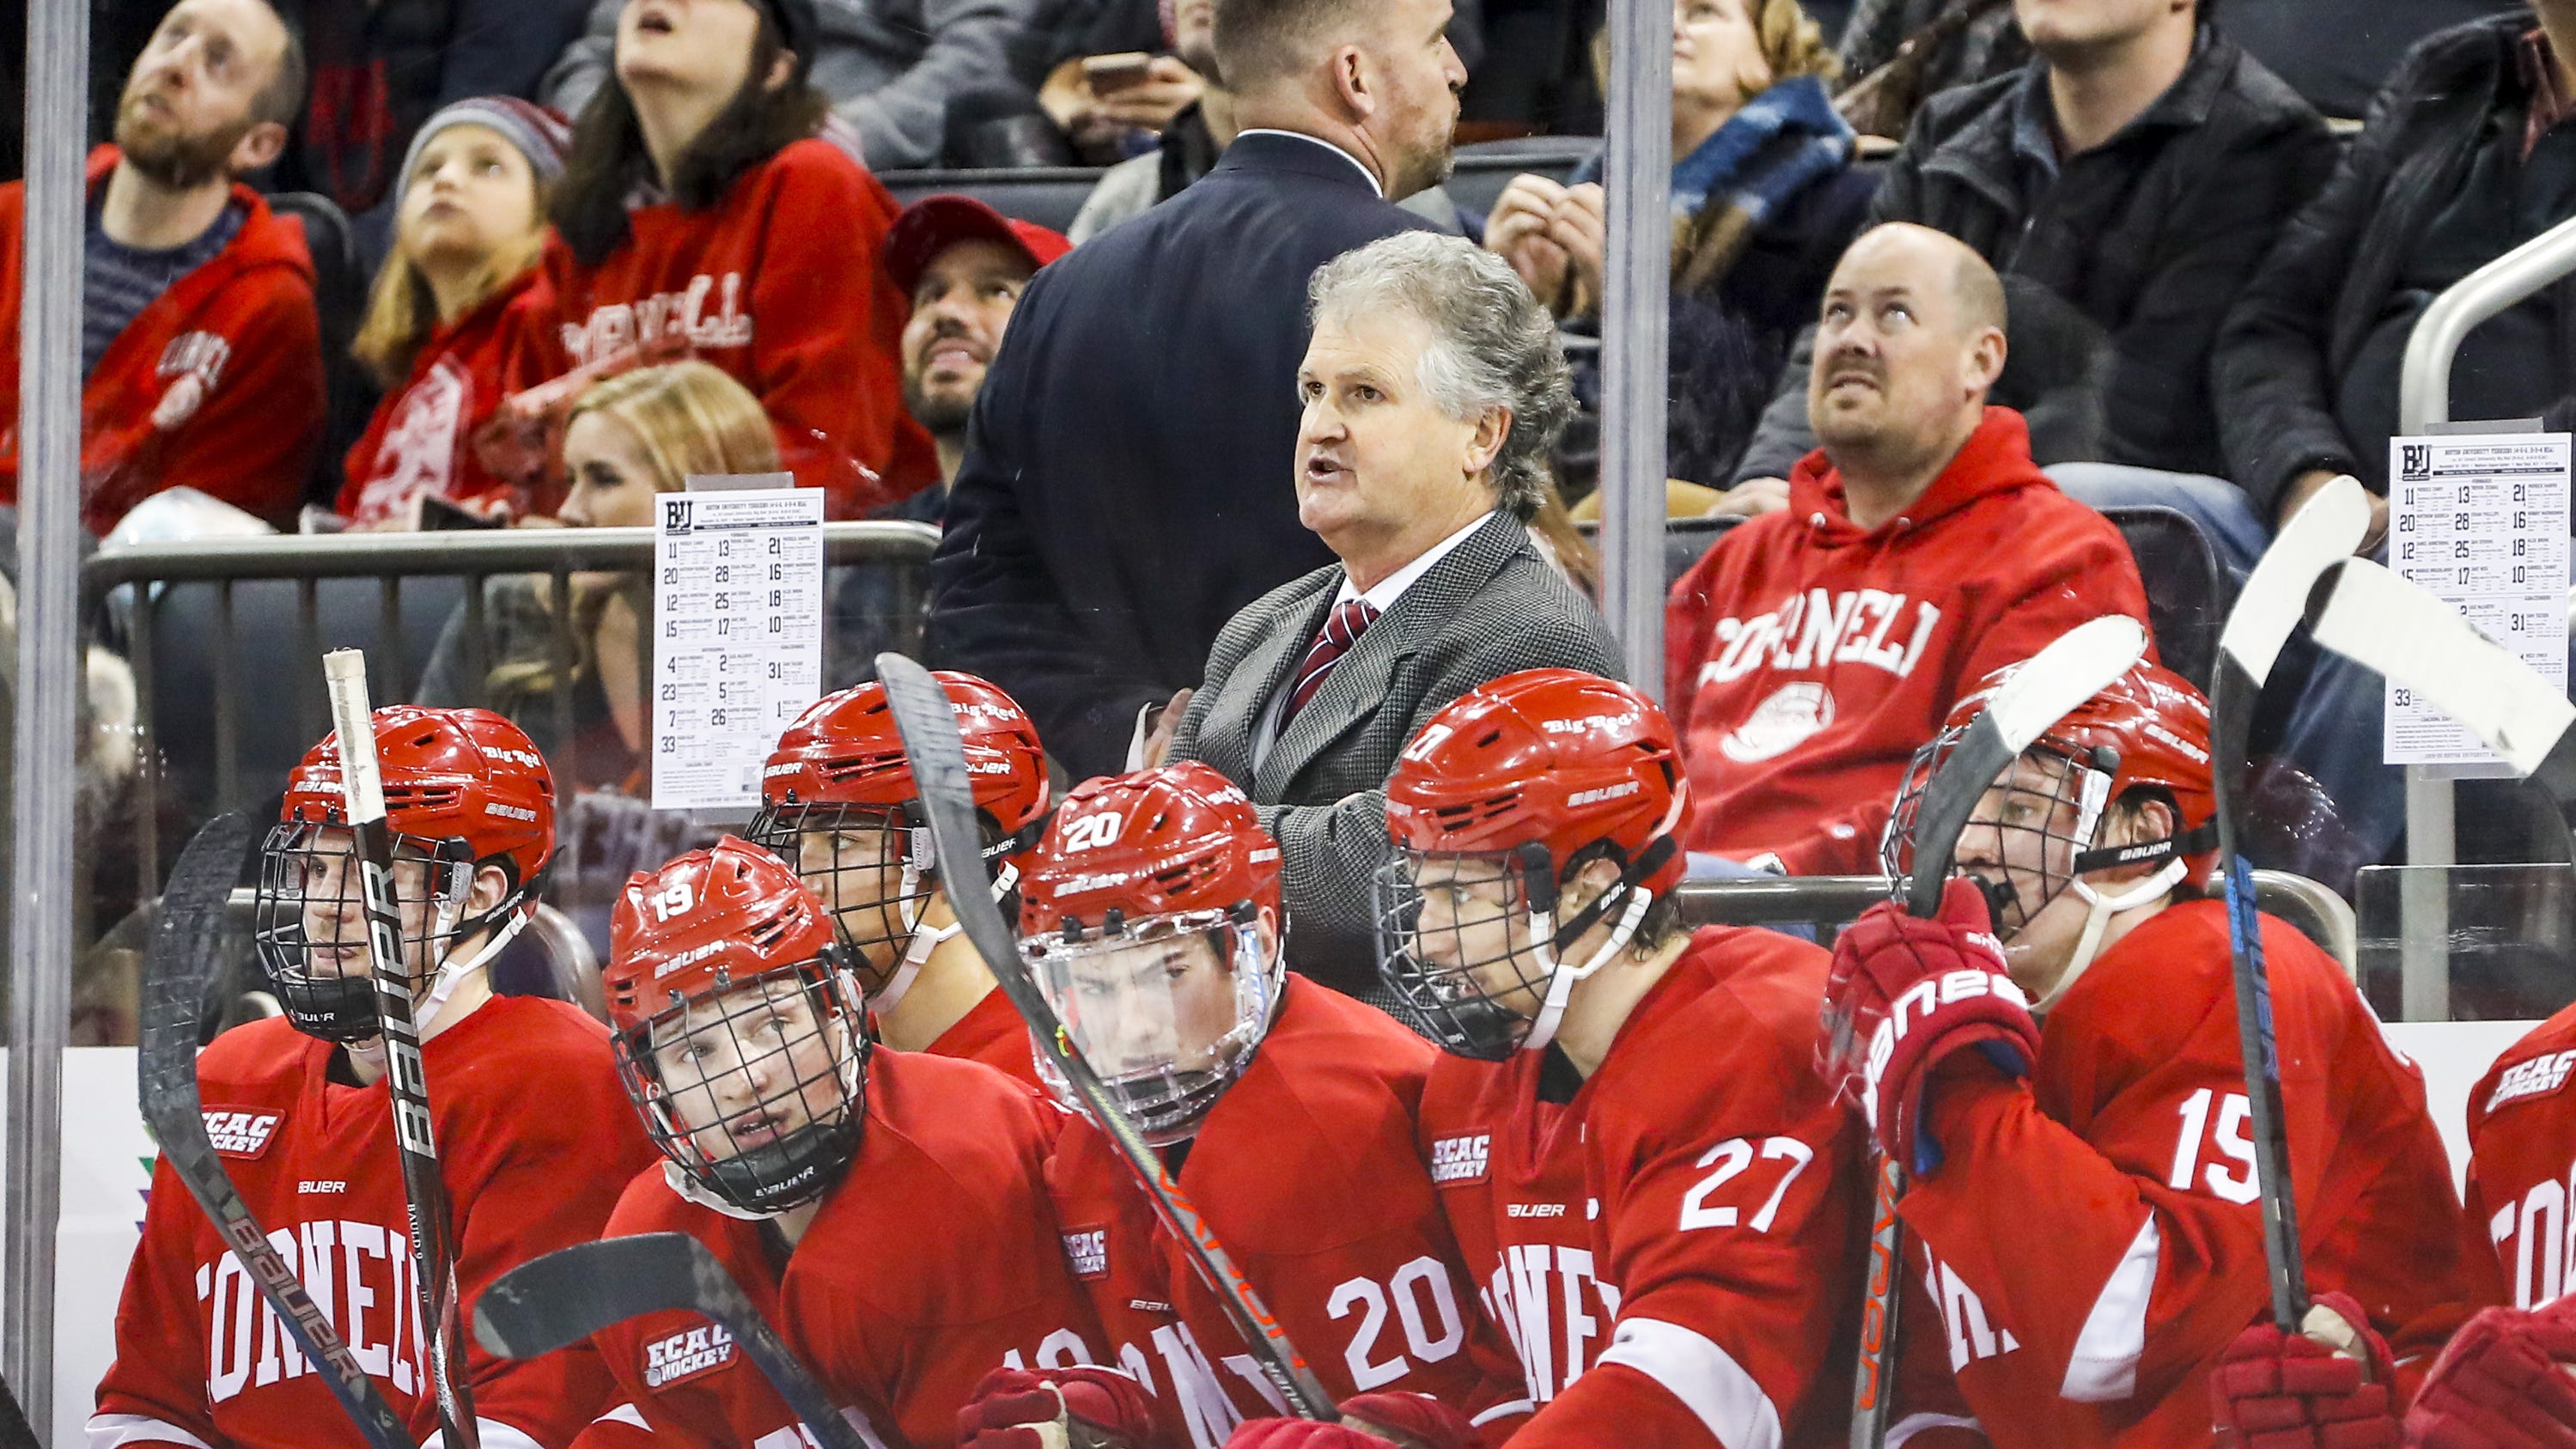 Cornell athletics remain on hold as Ivy League cancels winter sports